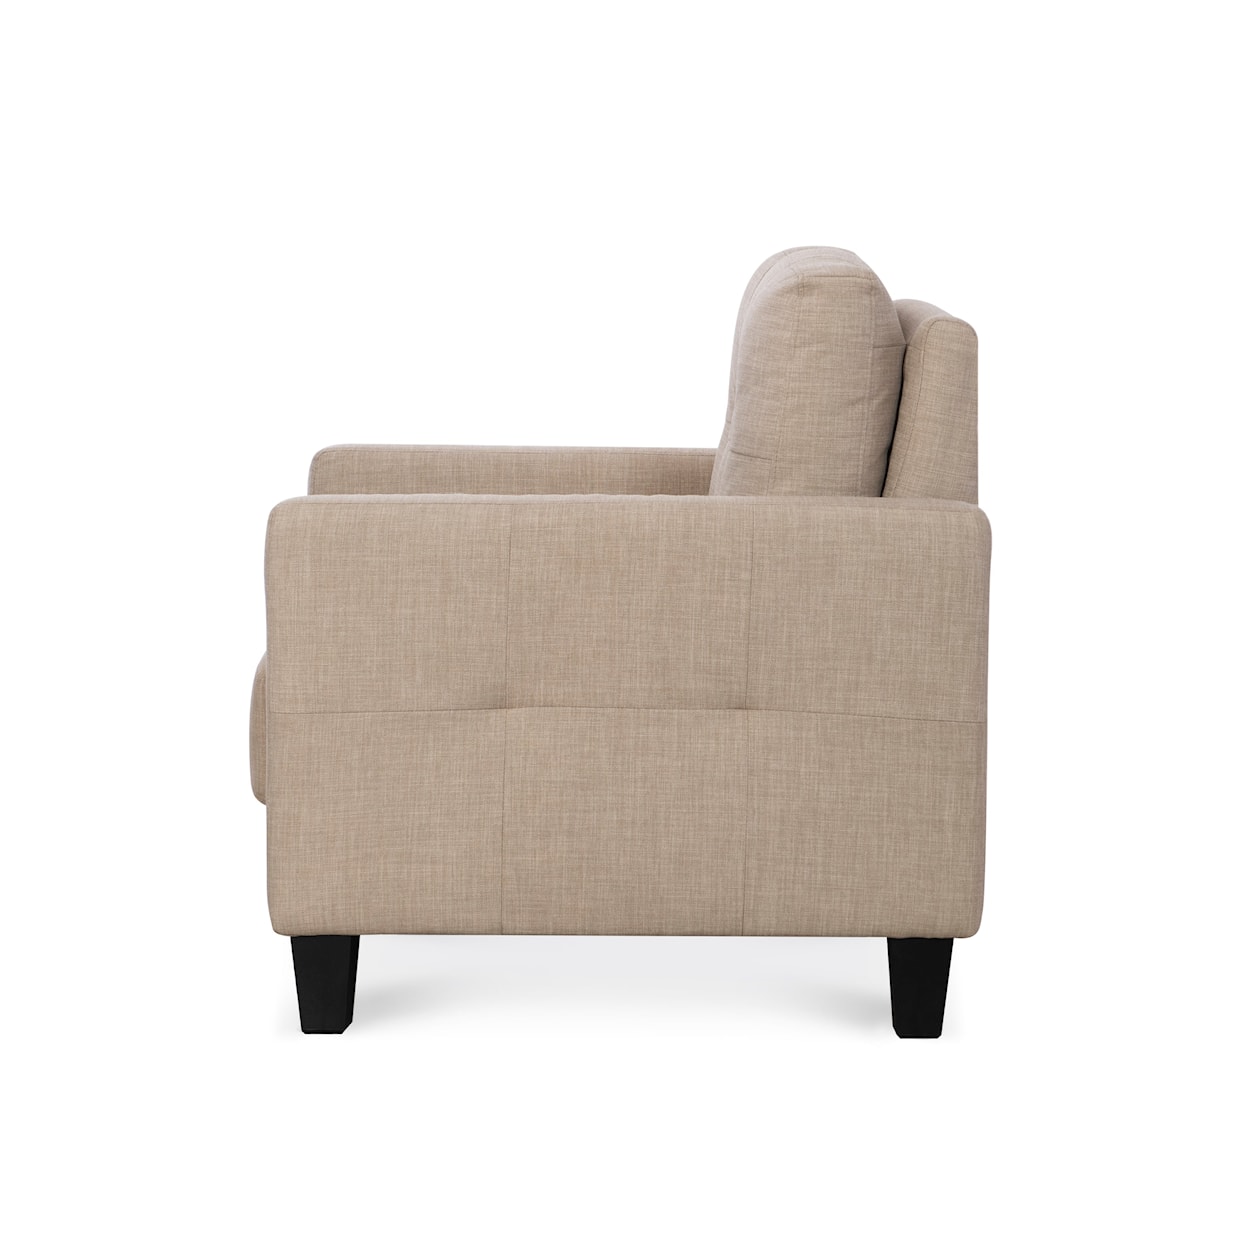 Home Furniture Outfitters Owen Chair